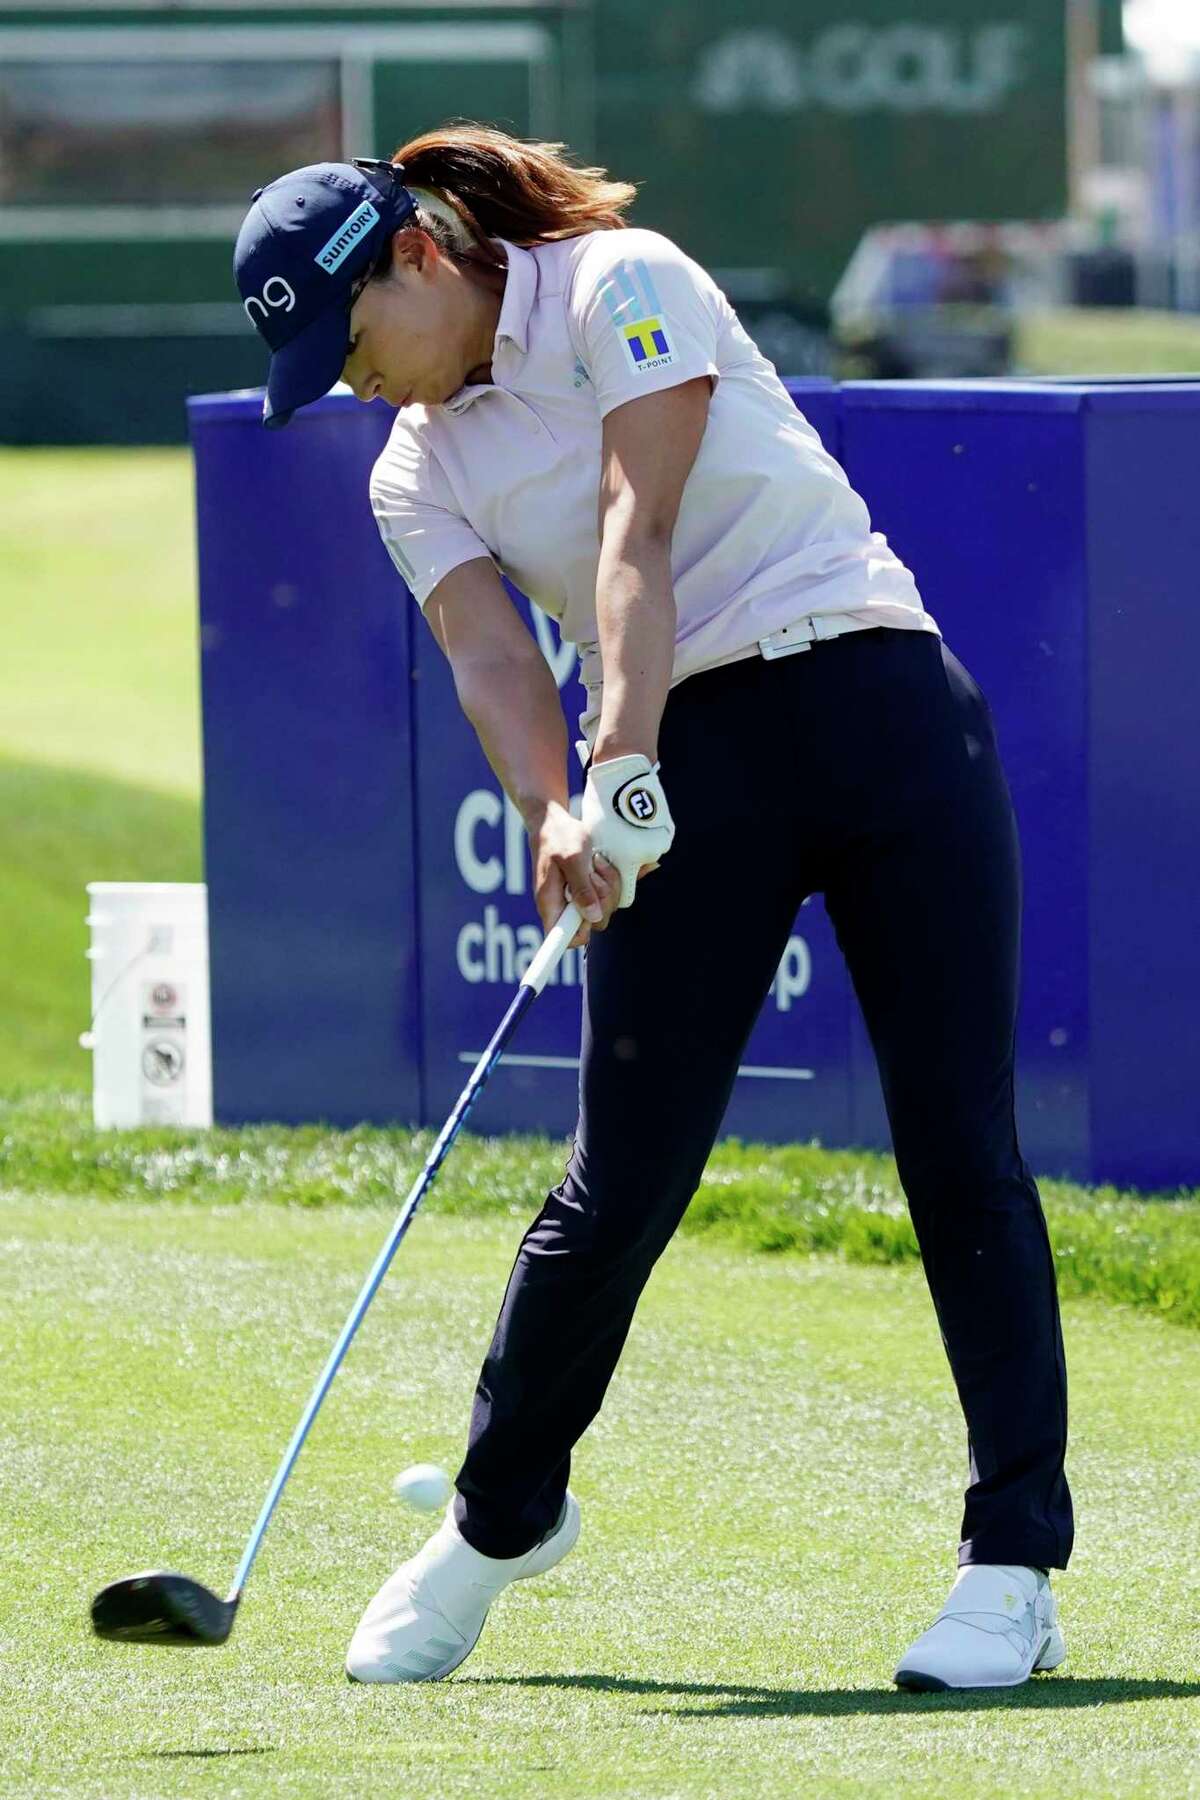 Hinako Shibuno hits from the 18th tee during the second round of the LPGA Chevron Championship golf tournament Friday, April 1, 2022, in Rancho Mirage, Calif. (AP Photo/Marcio Jose Sanchez)